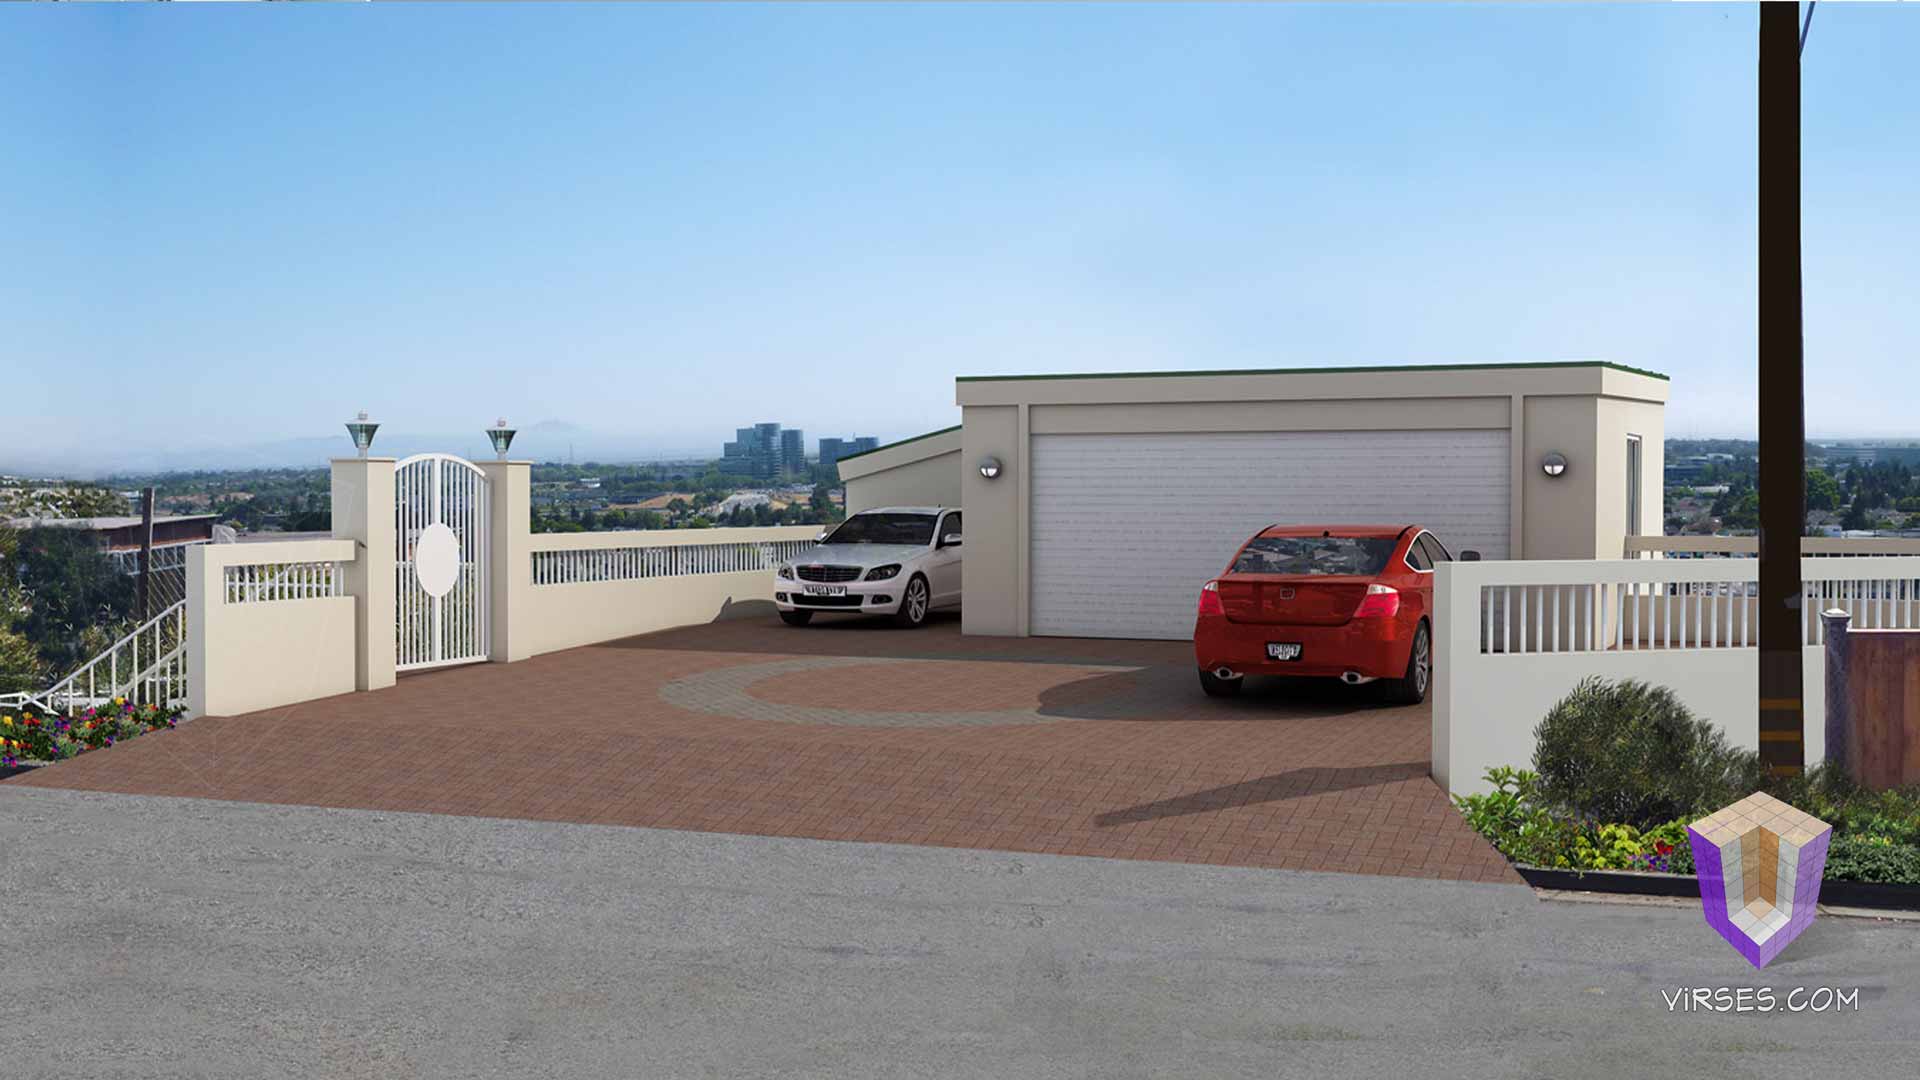 Driveway Addition And Renovation 3D Architectural Rendering